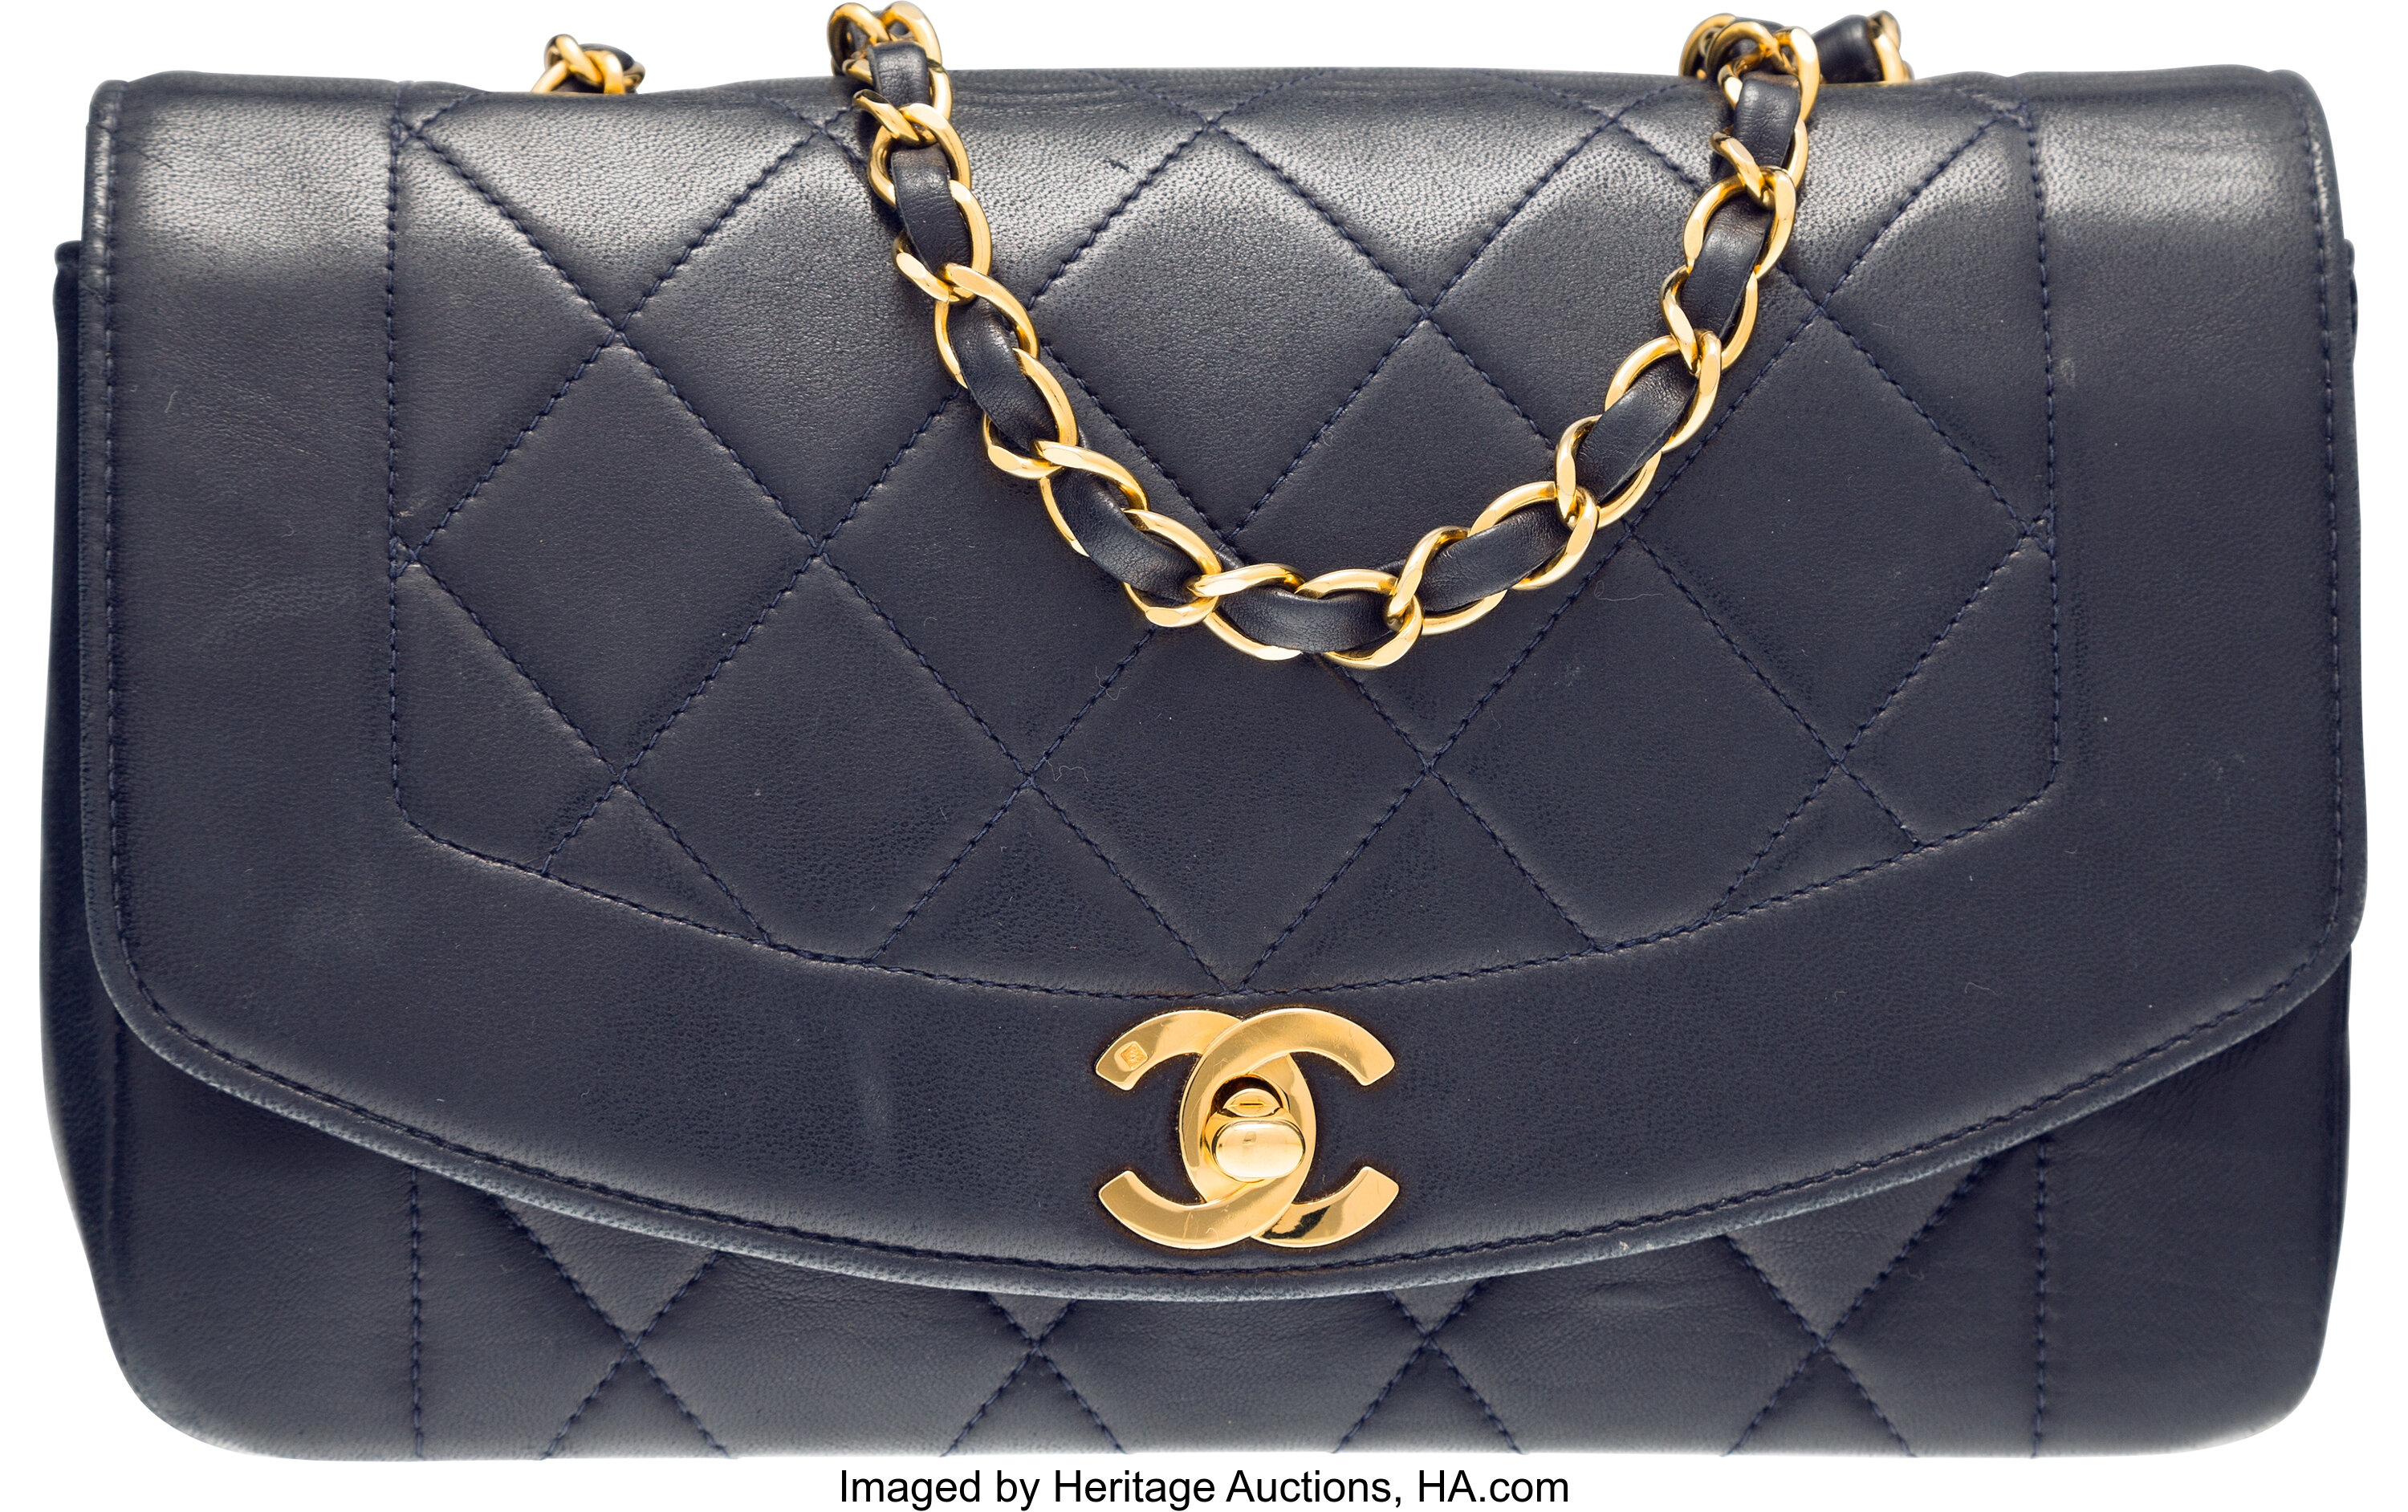 FASHION  My experience buying vintage Chanel, featuring my medium